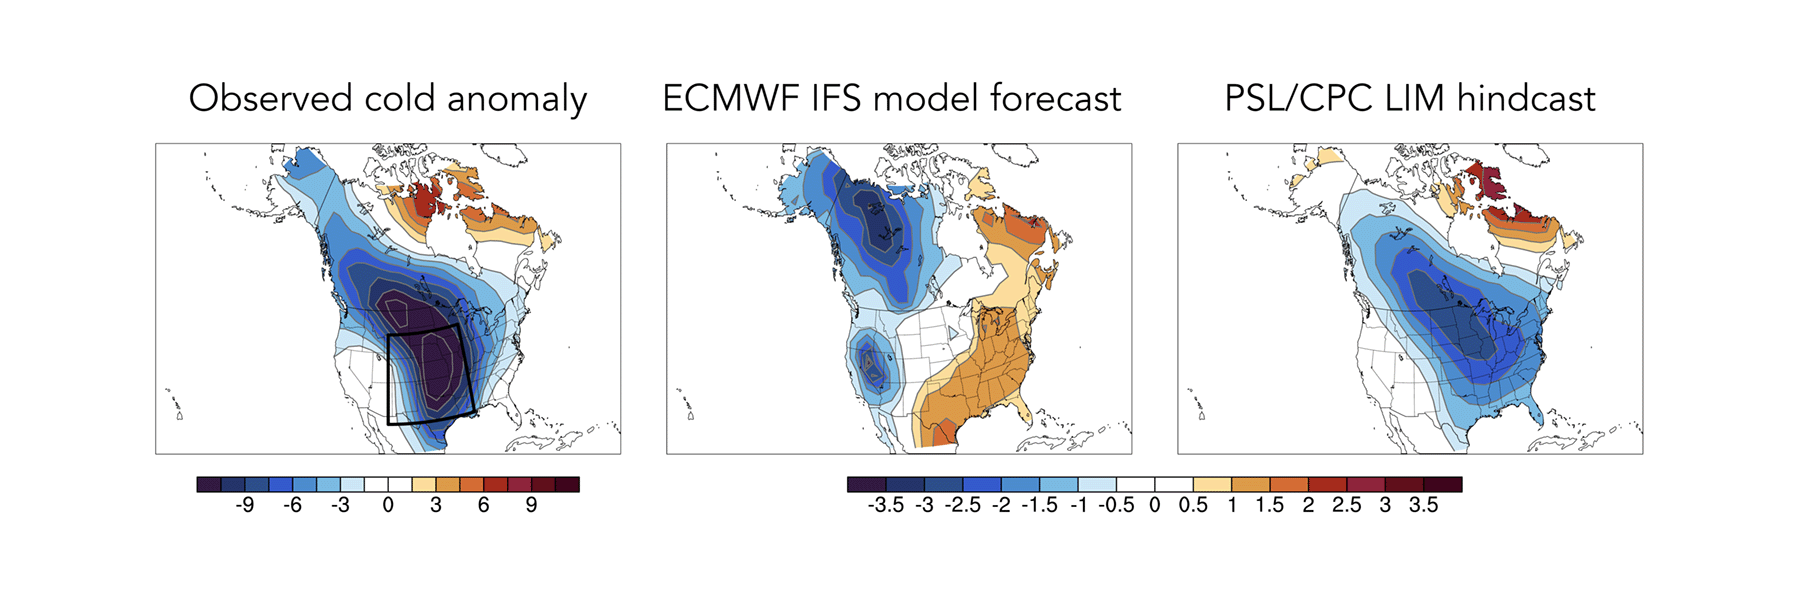 Temperature anomaly maps comparing observations, the European Center for Medium Range Weather Forecasting IFS model forecast, and the LIM reforecast